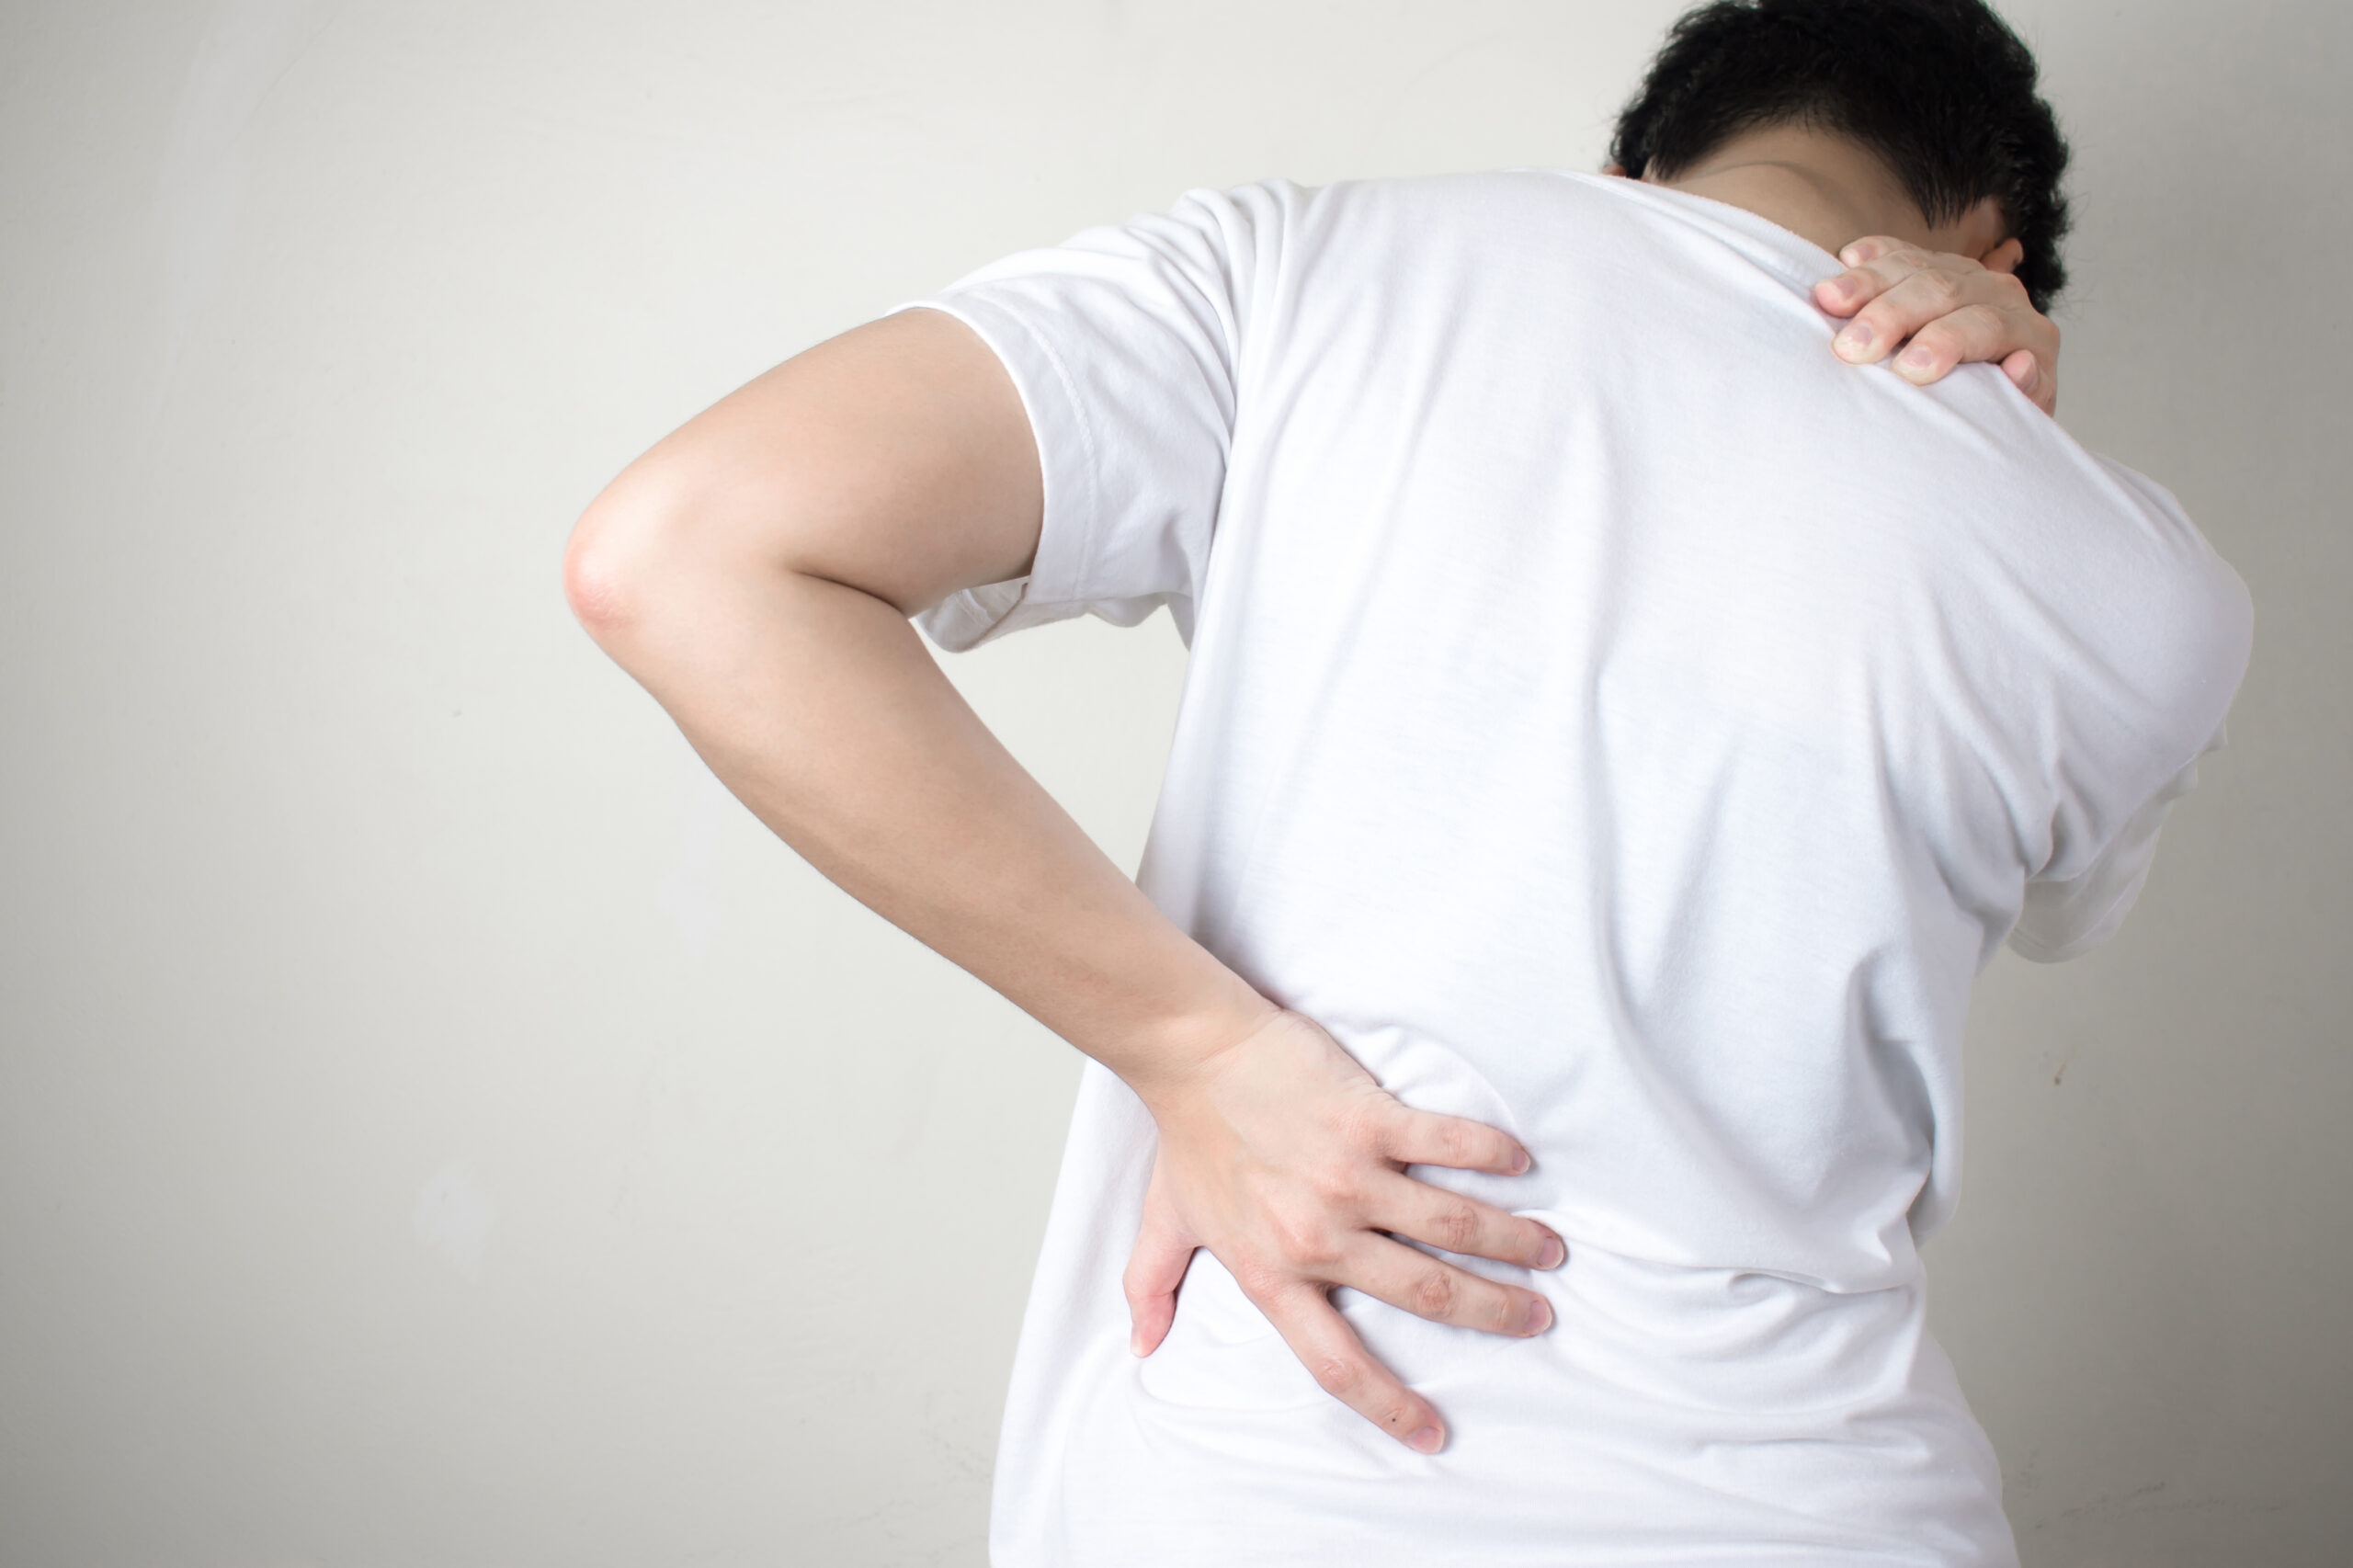 Home Remedies Lower Back Pain